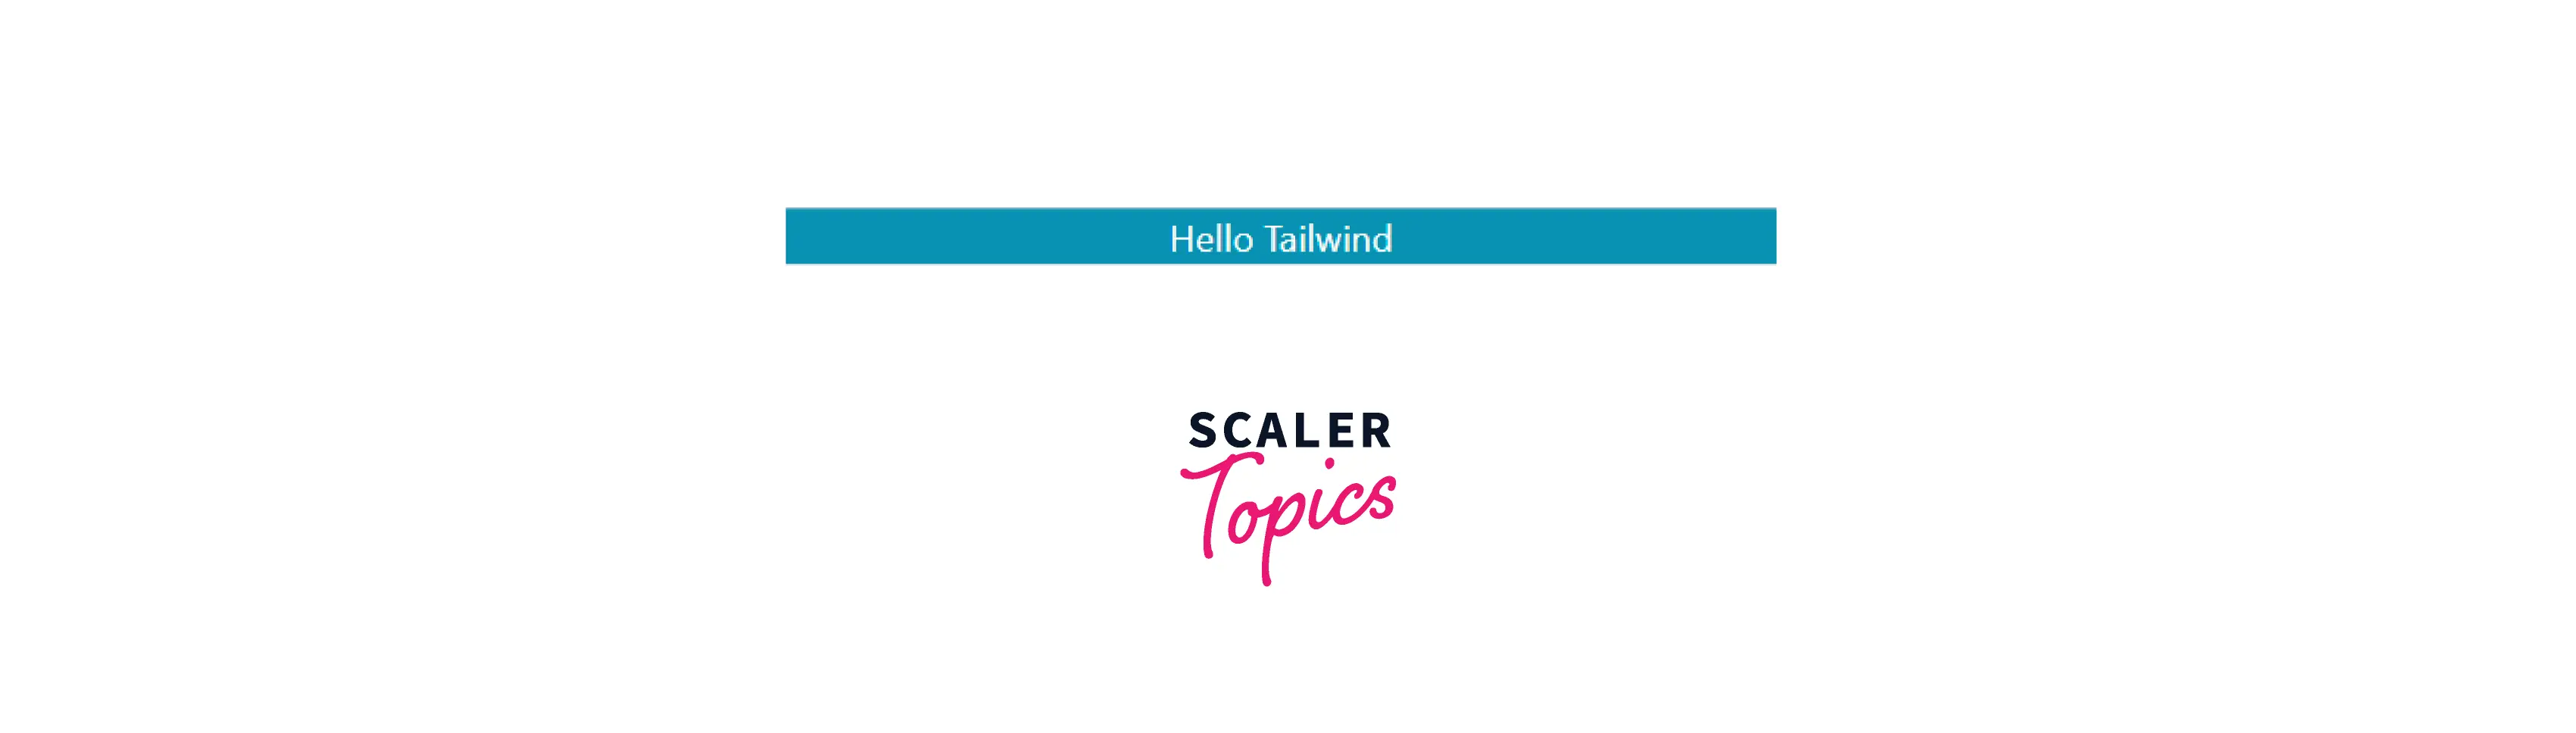 Tailwind CSS in React